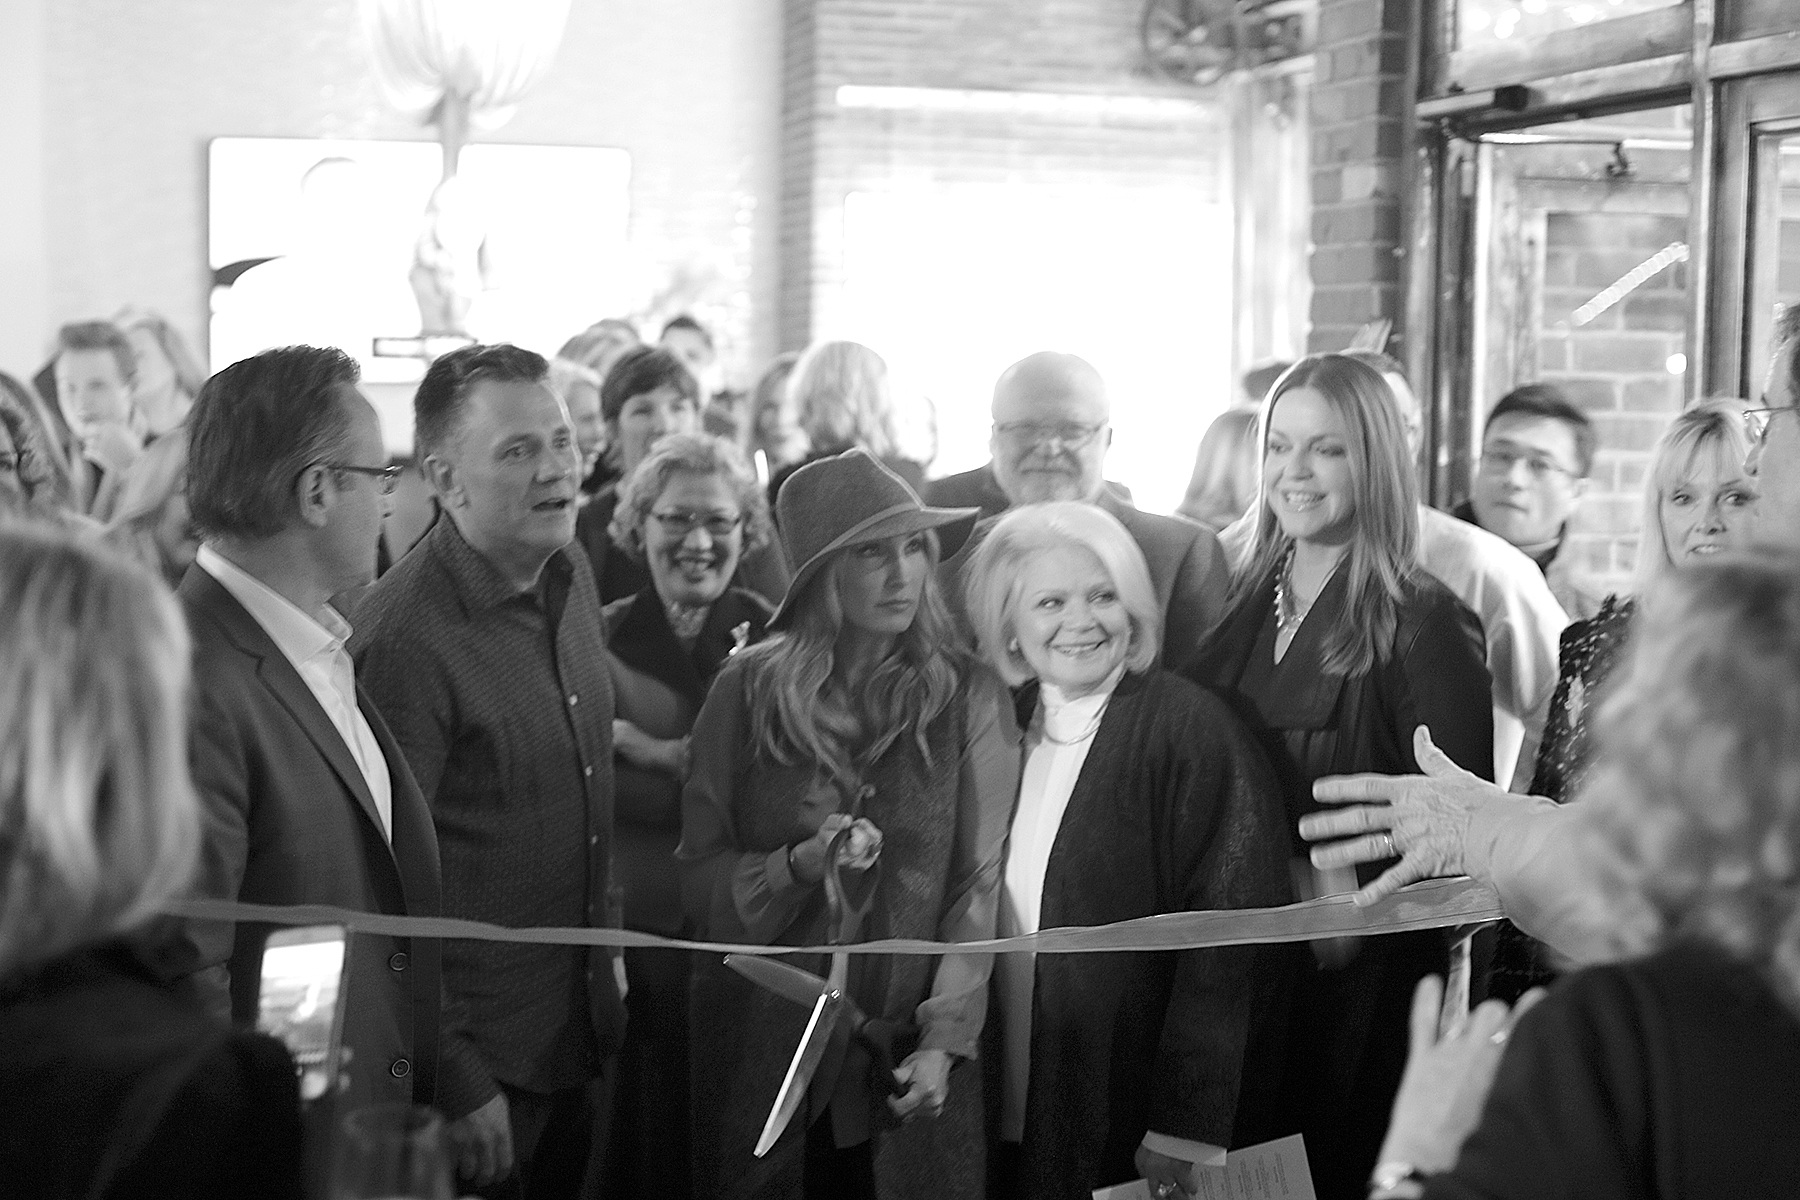 Andrea Savage photo                                Realogics Sotheby’s vice president Stacy Jones prepares to cut the ribbon at the opening of the real estate firm’s new Island Living Gallery.